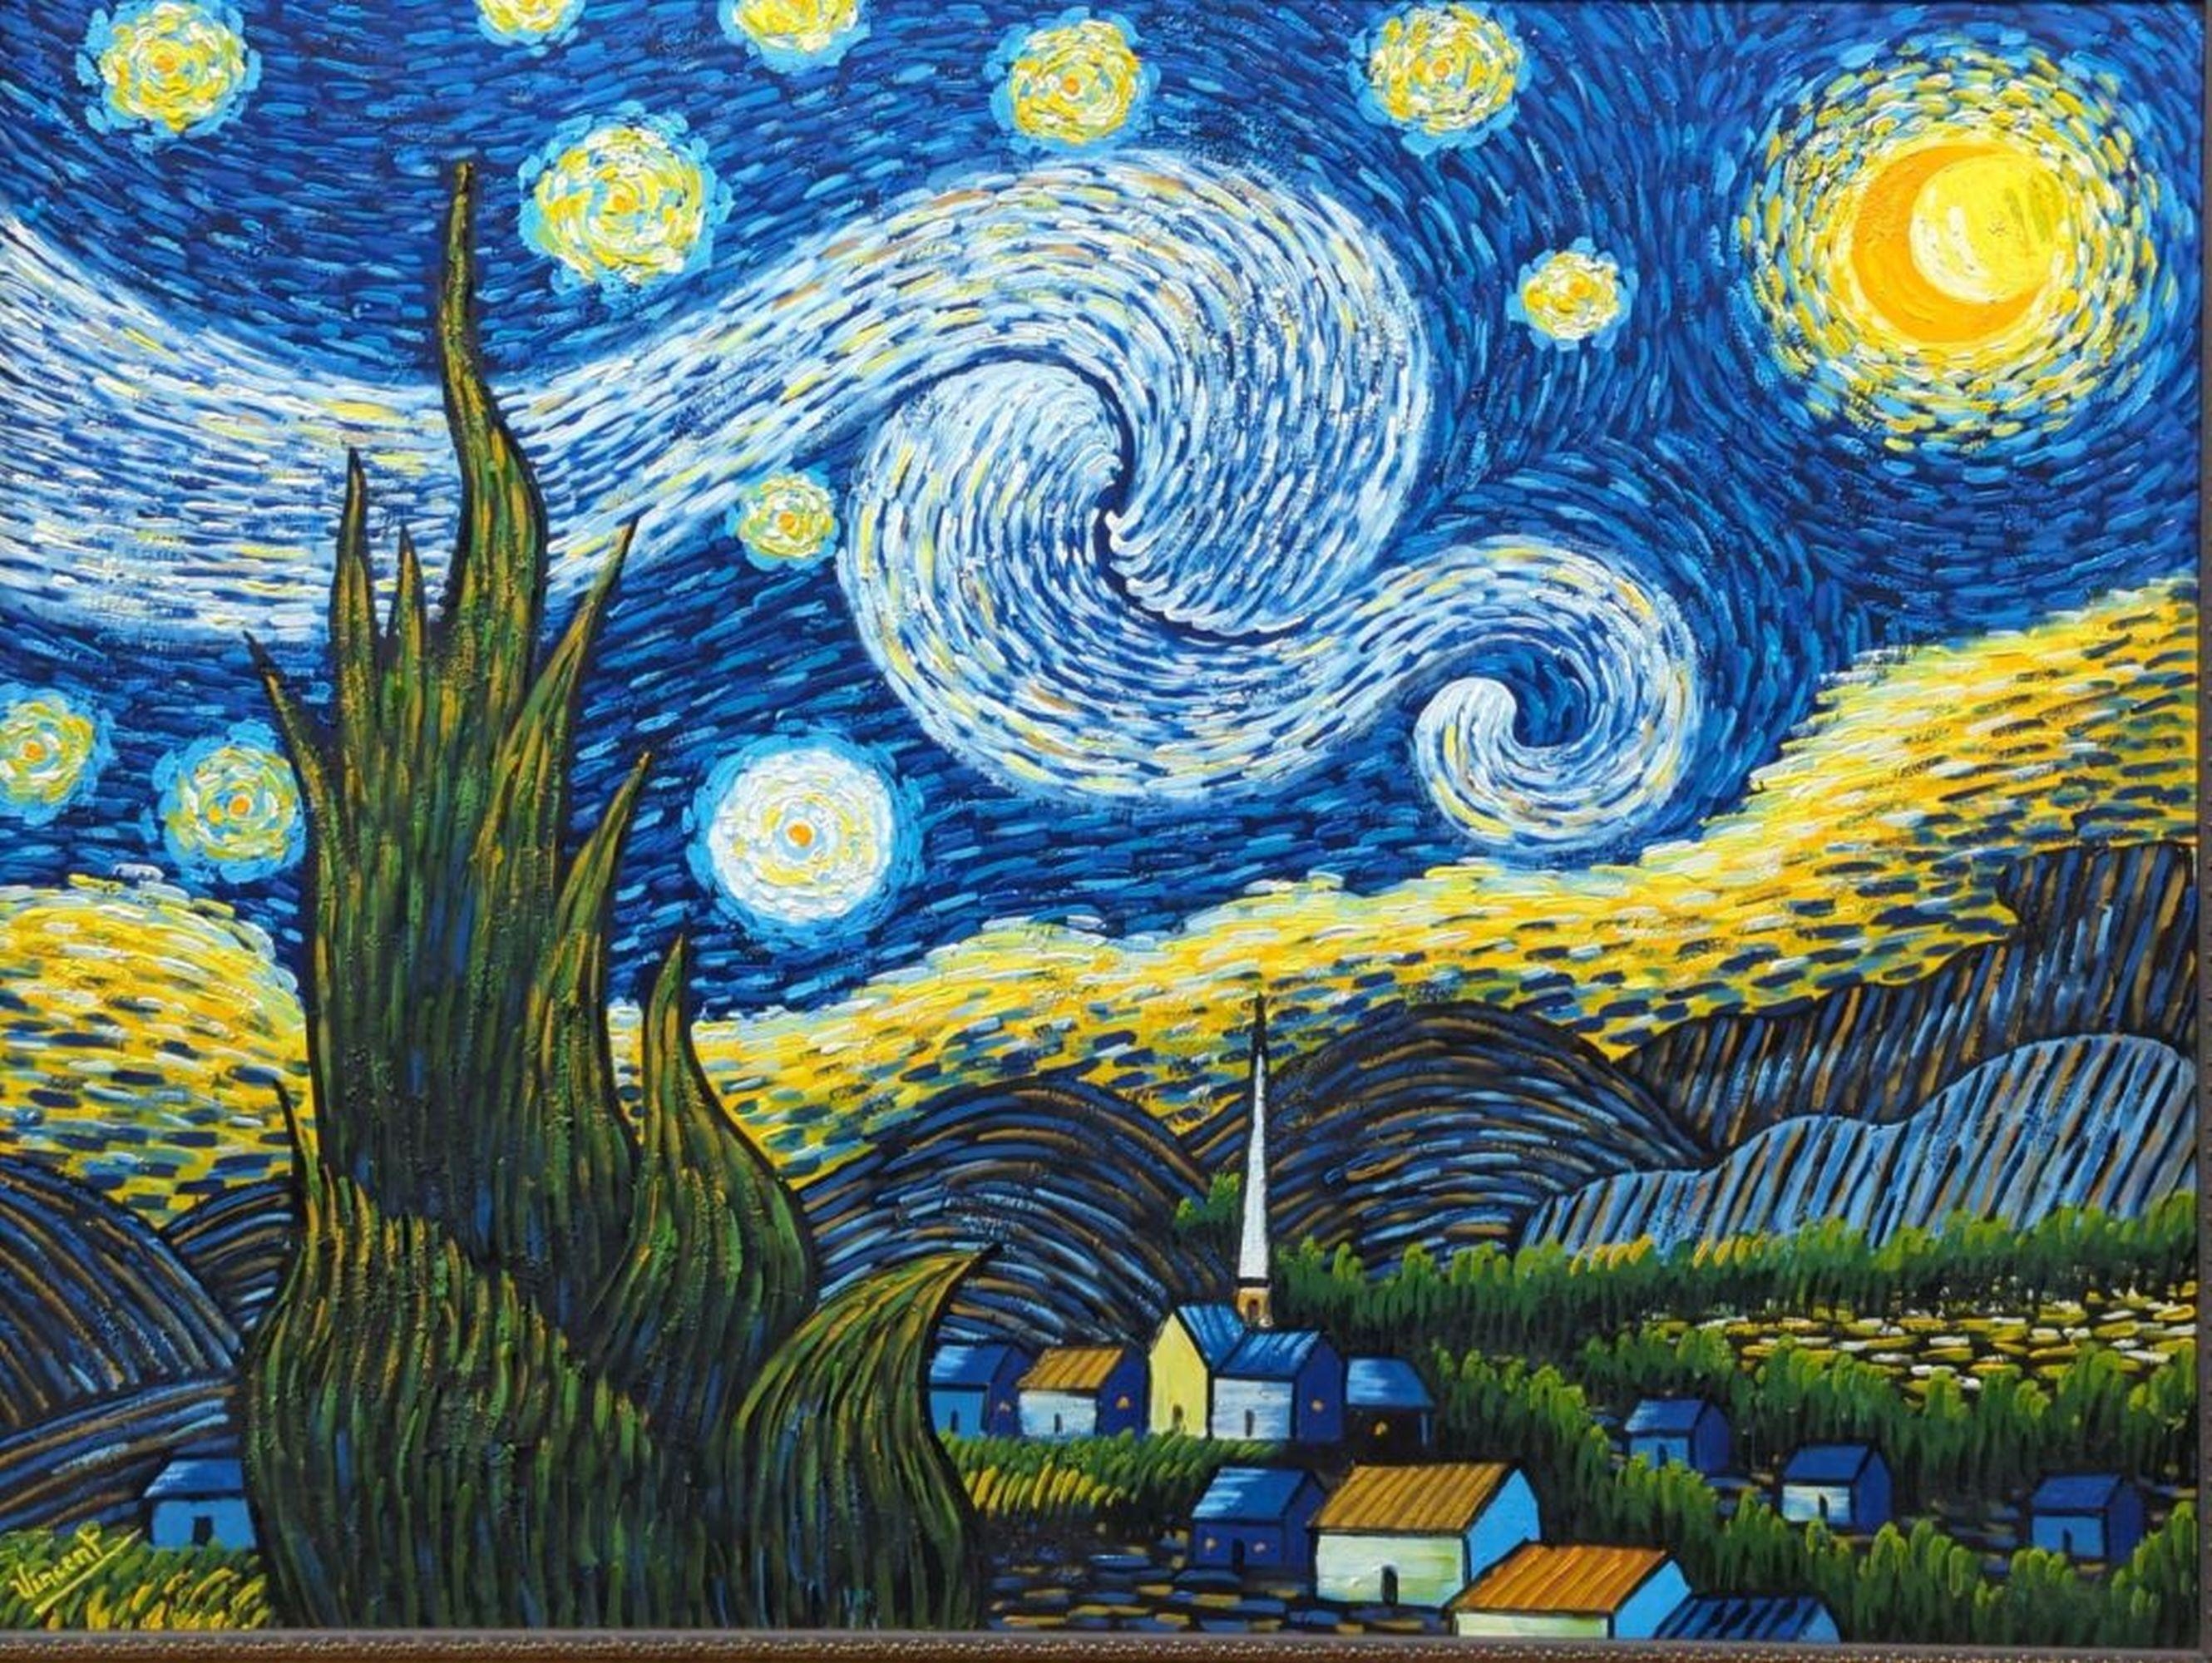 Artwork by Vincent van Gogh, Starry Night, Made of Oil on Canvas